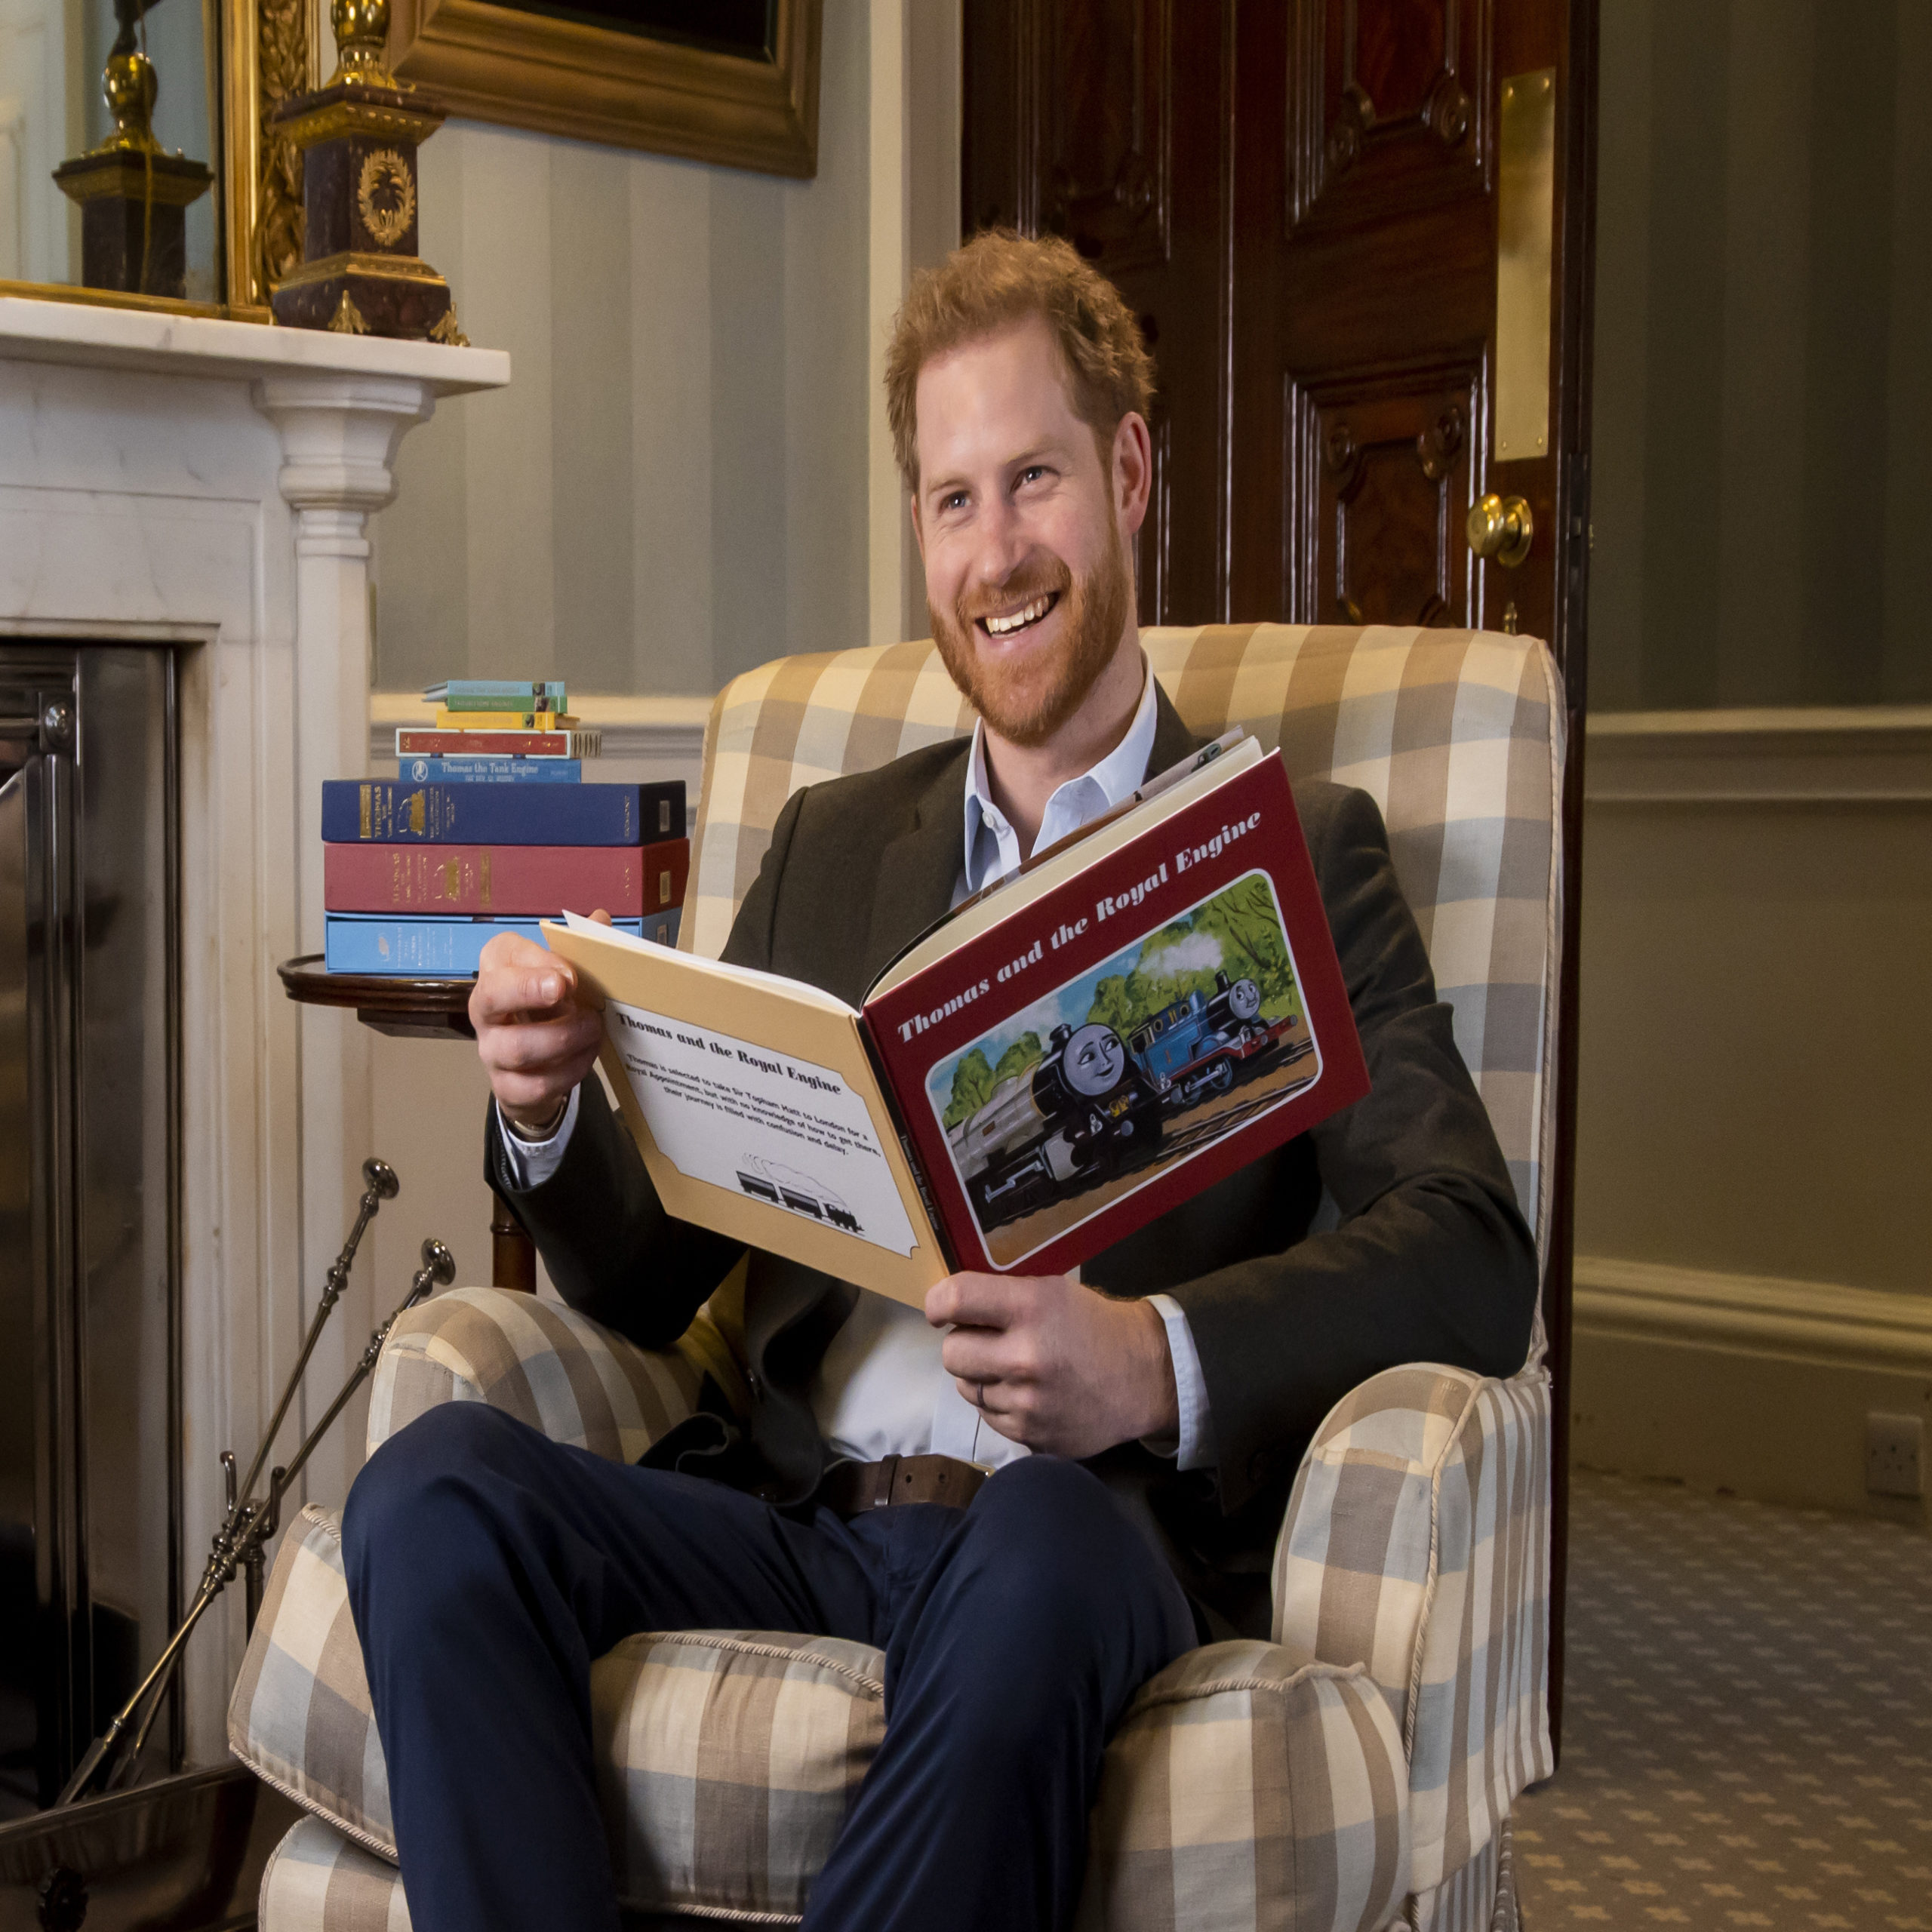 Prince Harry reading a children's book